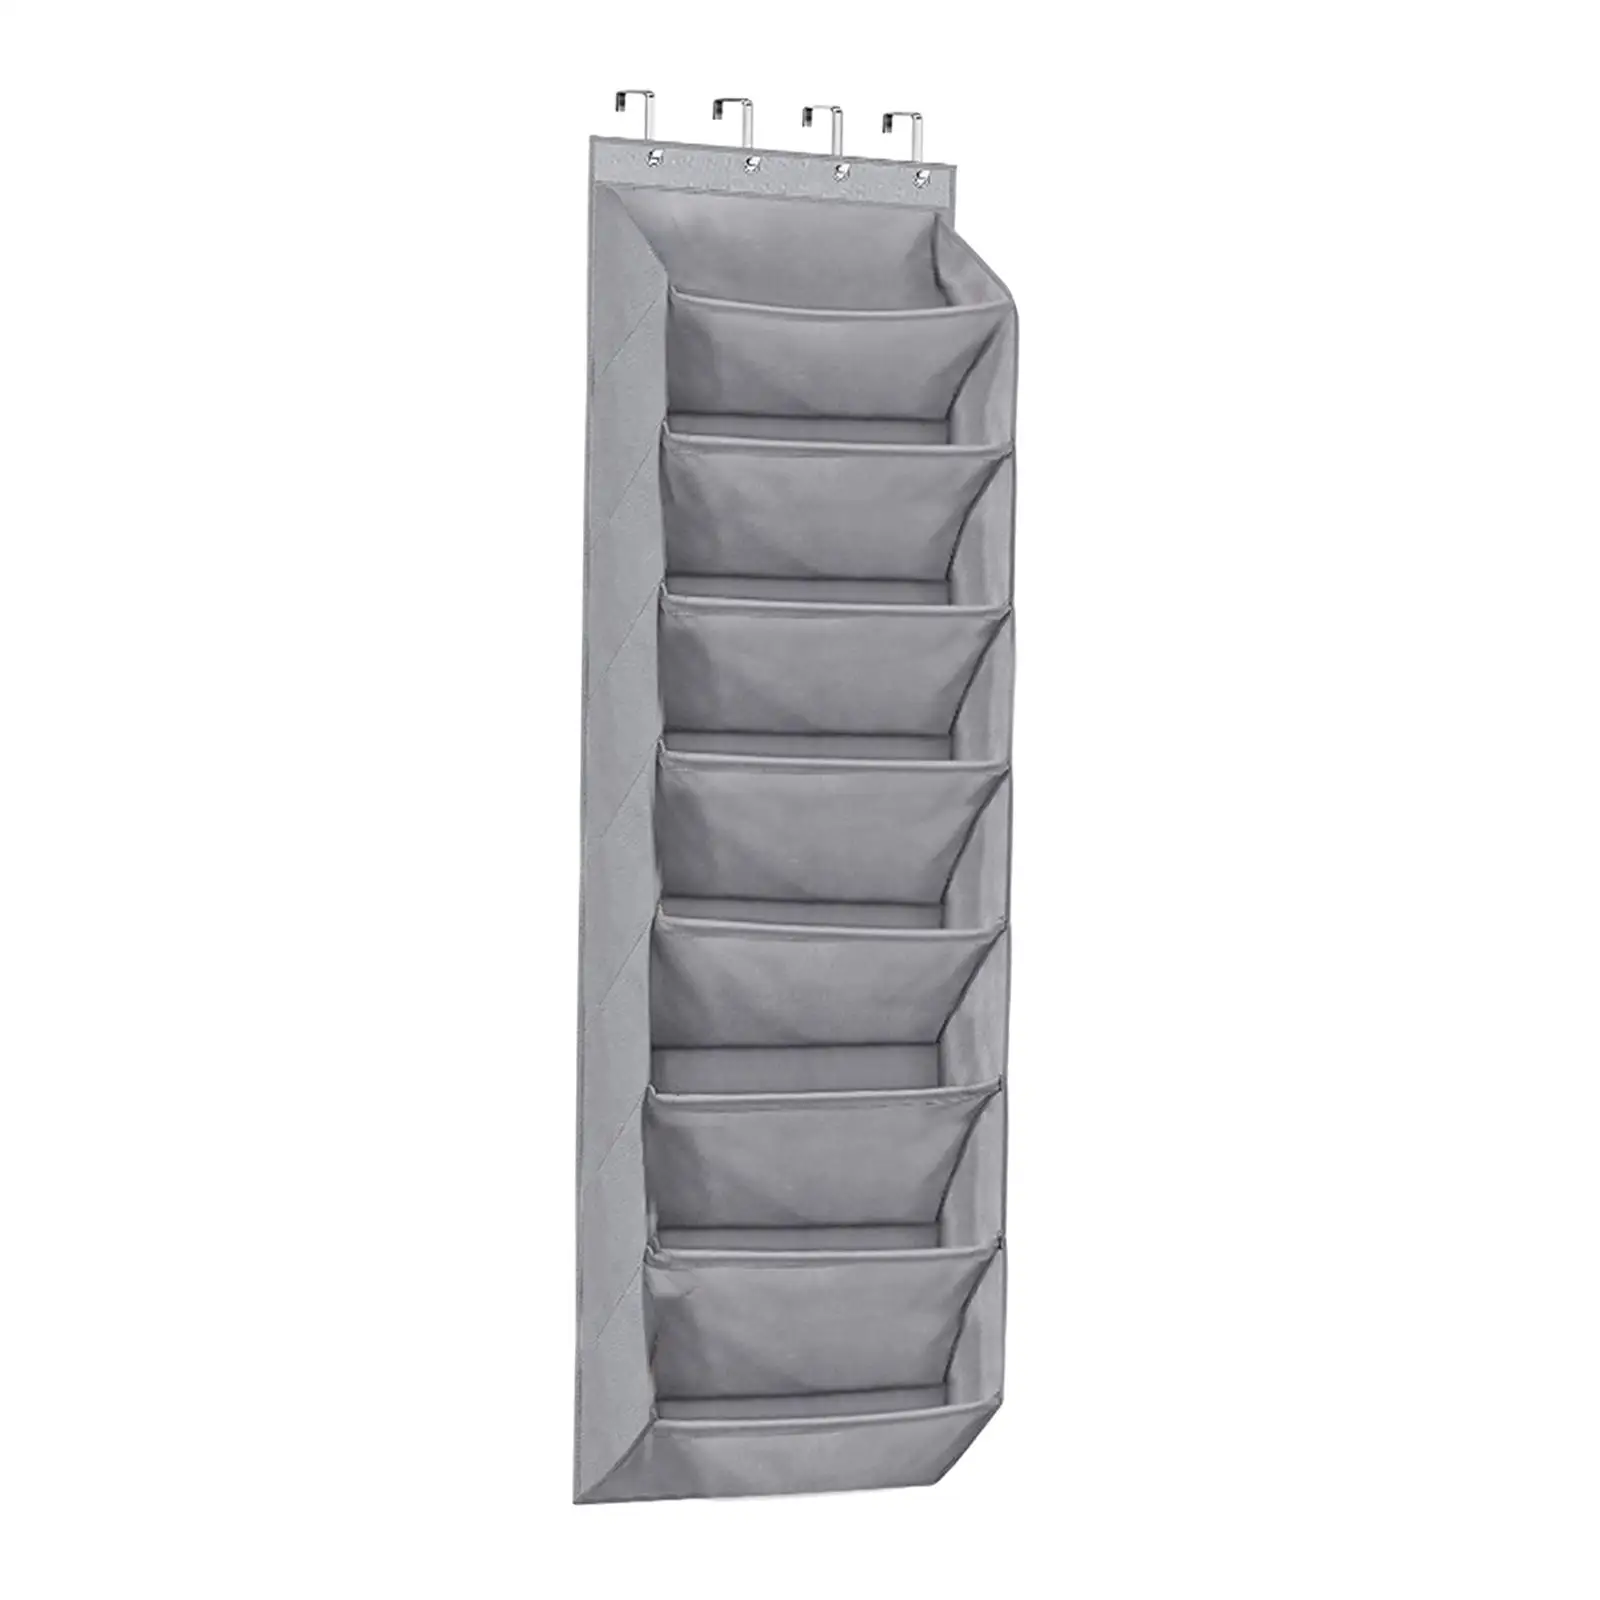 Hanging Storage Bag for Closet Door 8 Tier Foldable Gray Shoe Holder for Narrow Door for Toys Crafts Baby Items Clothing Towels